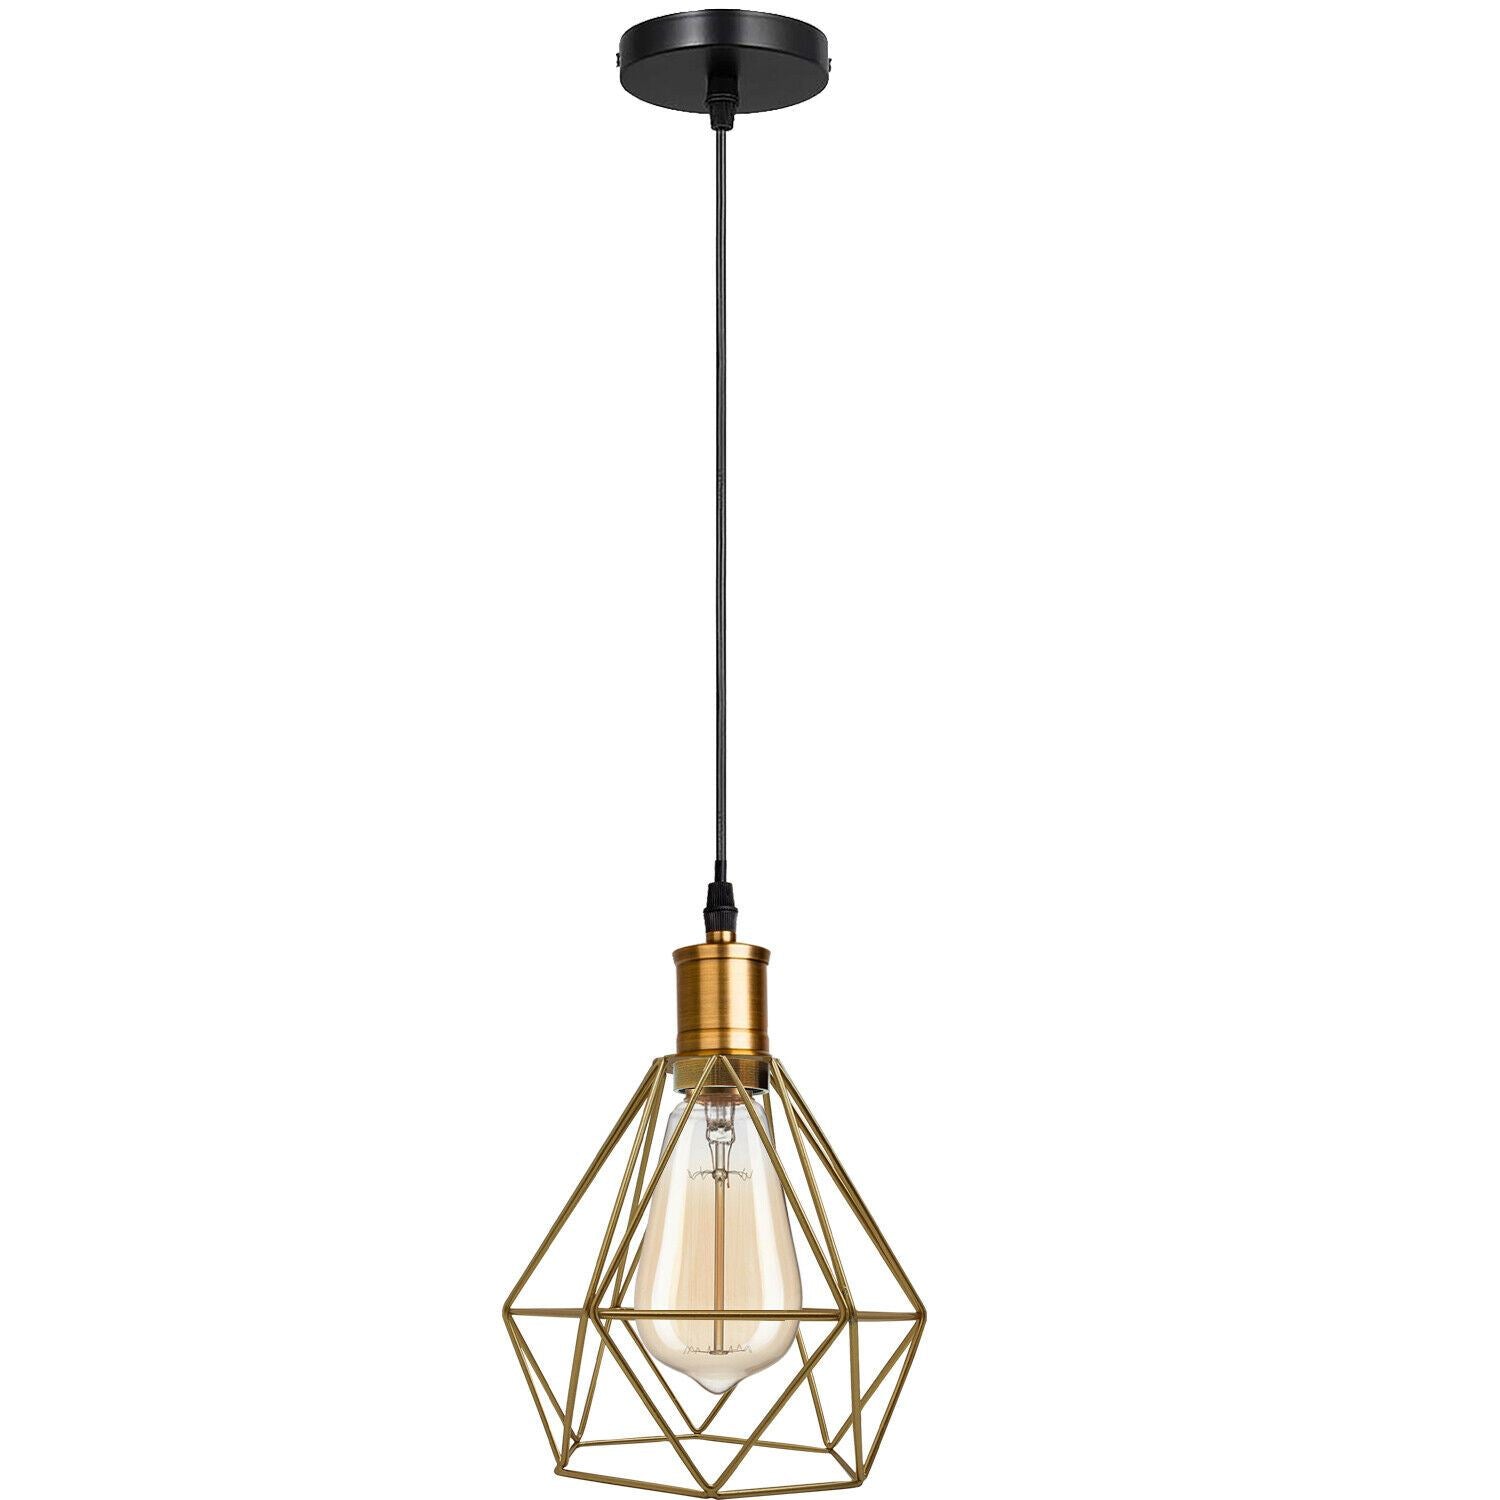 Modern Vintage Diamond Cage Ceiling Pendant Light Fitting Geometric Wire Cage 